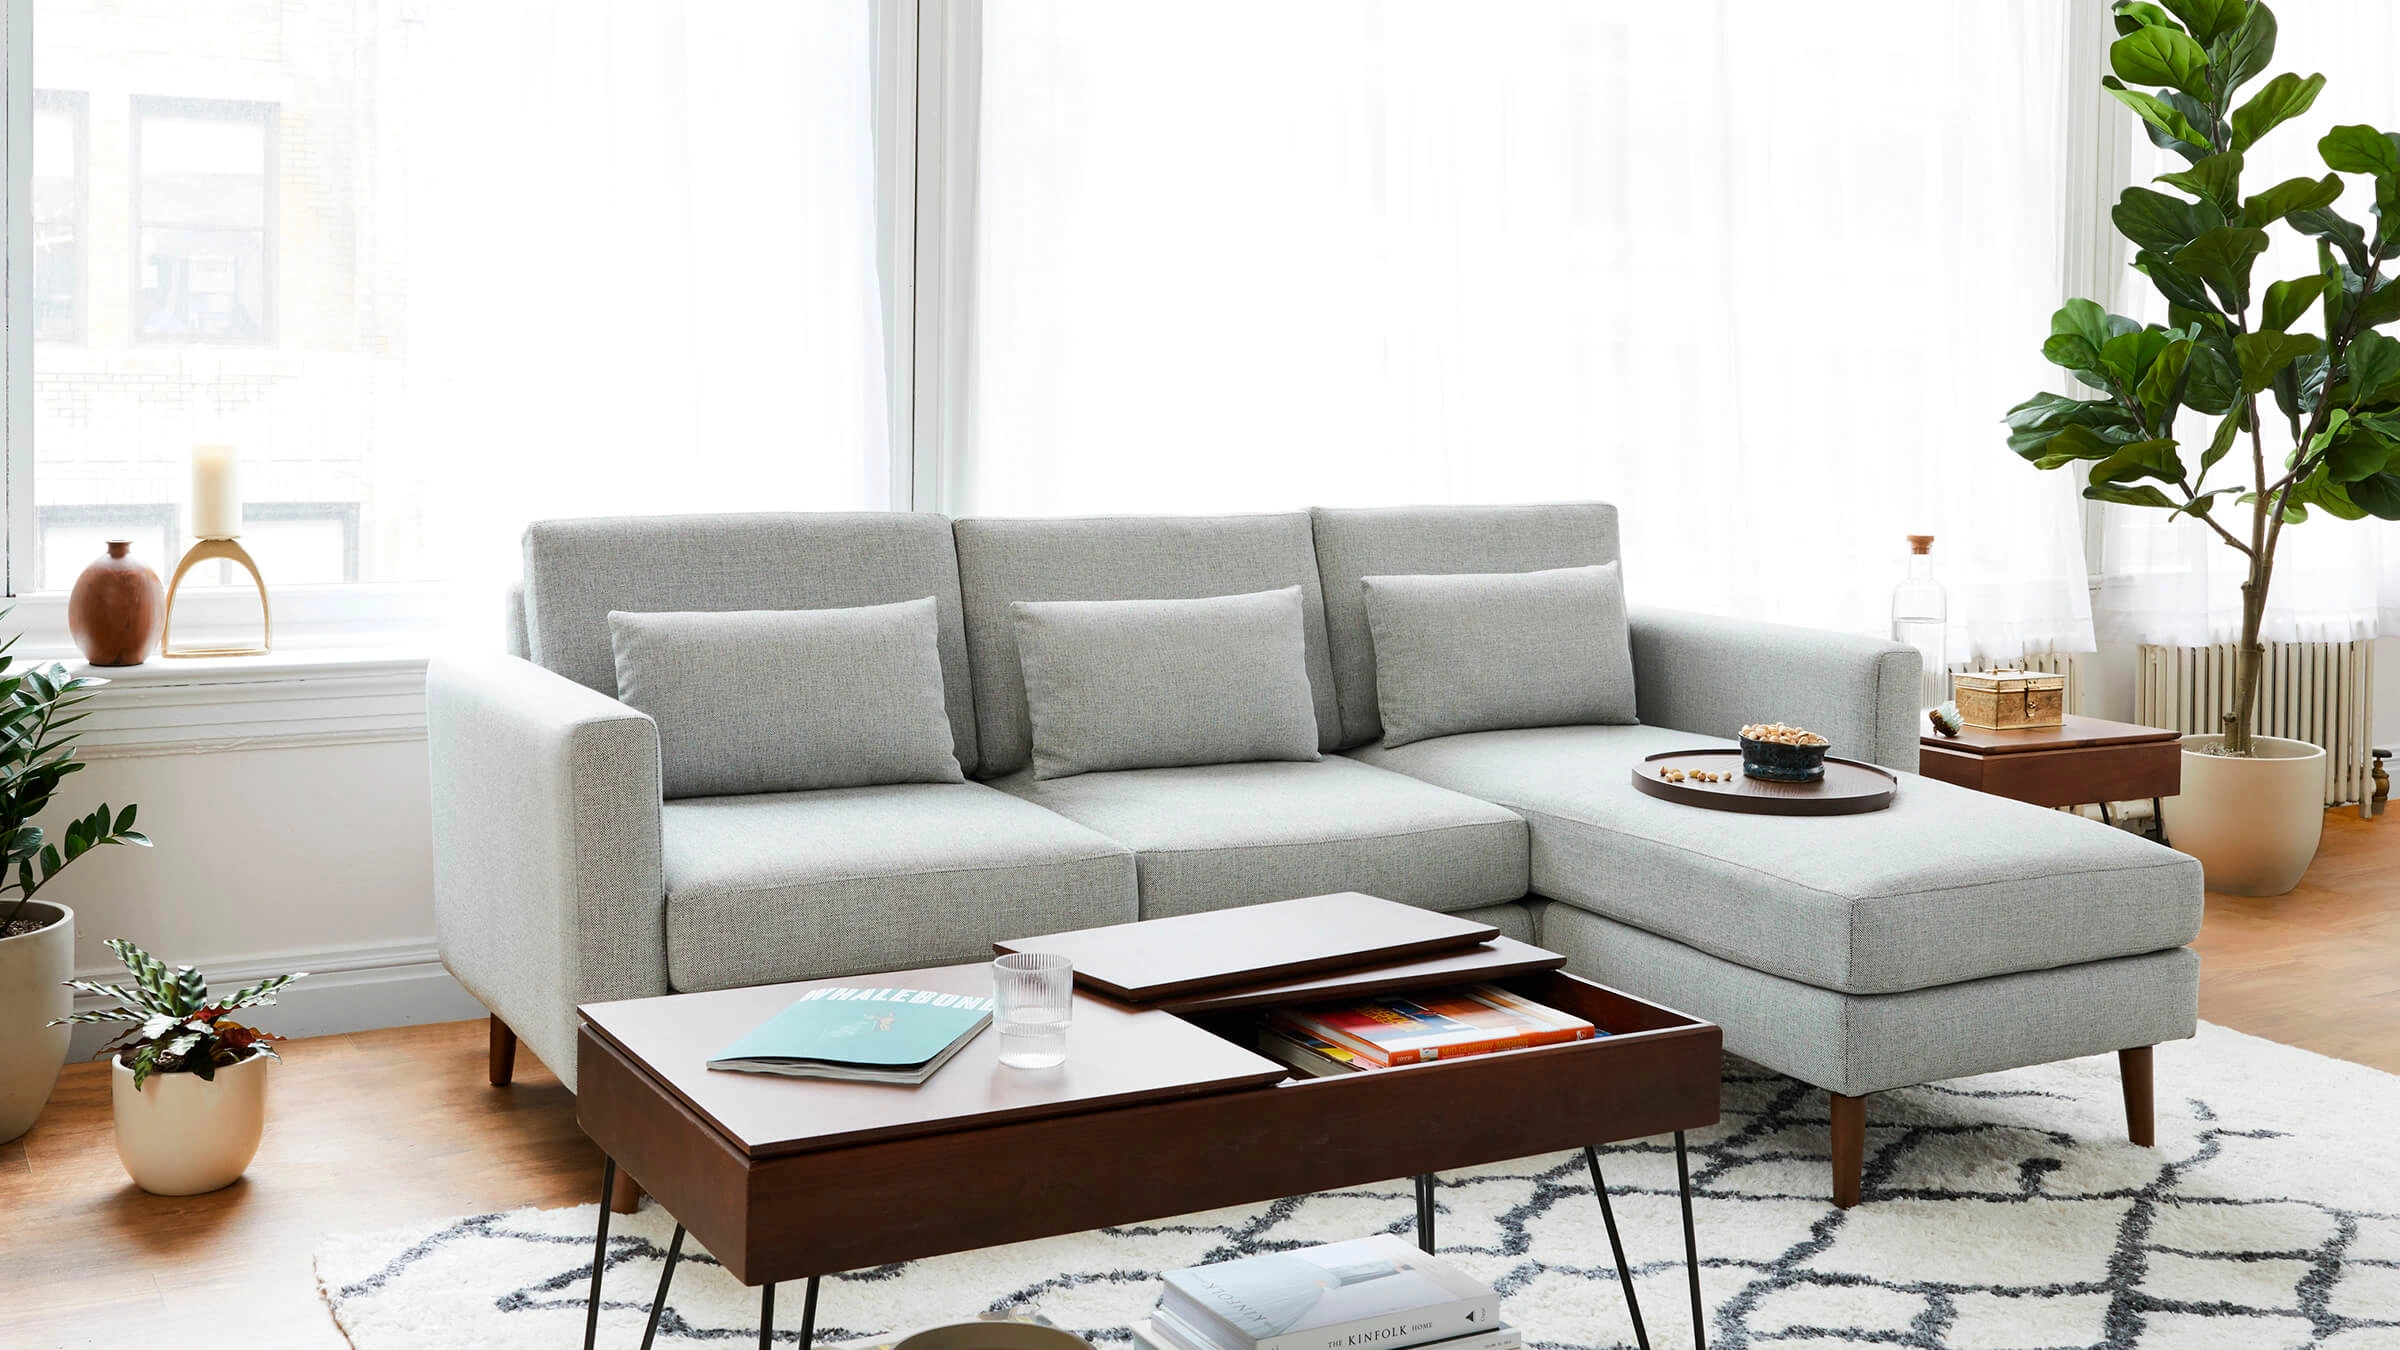 Best Stores to Buy Mid-Century Modern Furniture